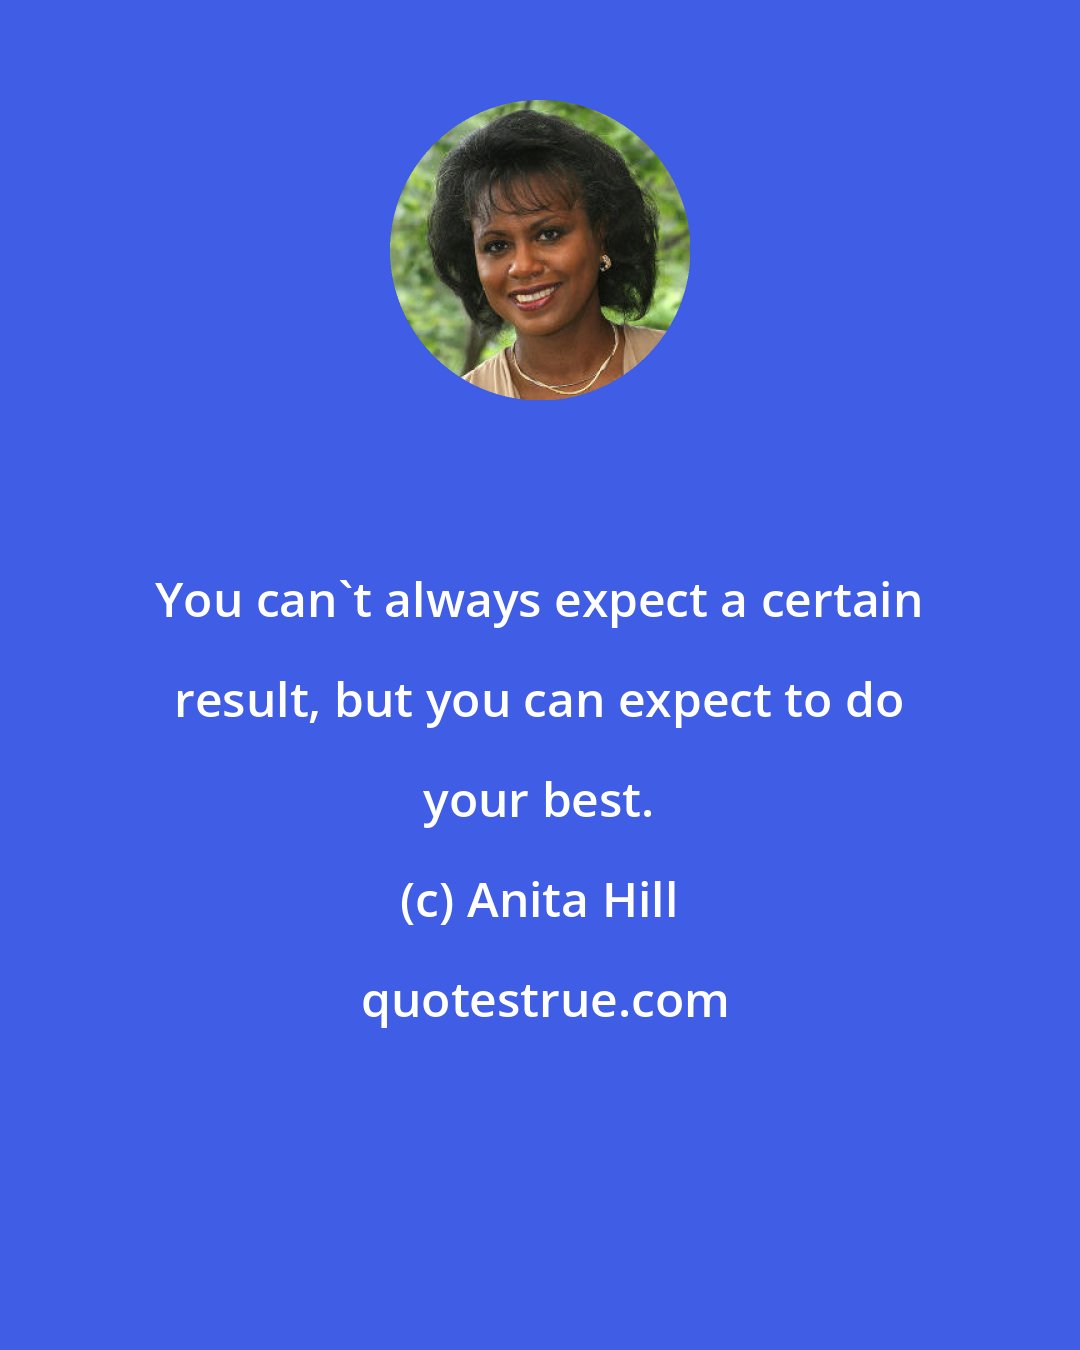 Anita Hill: You can't always expect a certain result, but you can expect to do your best.